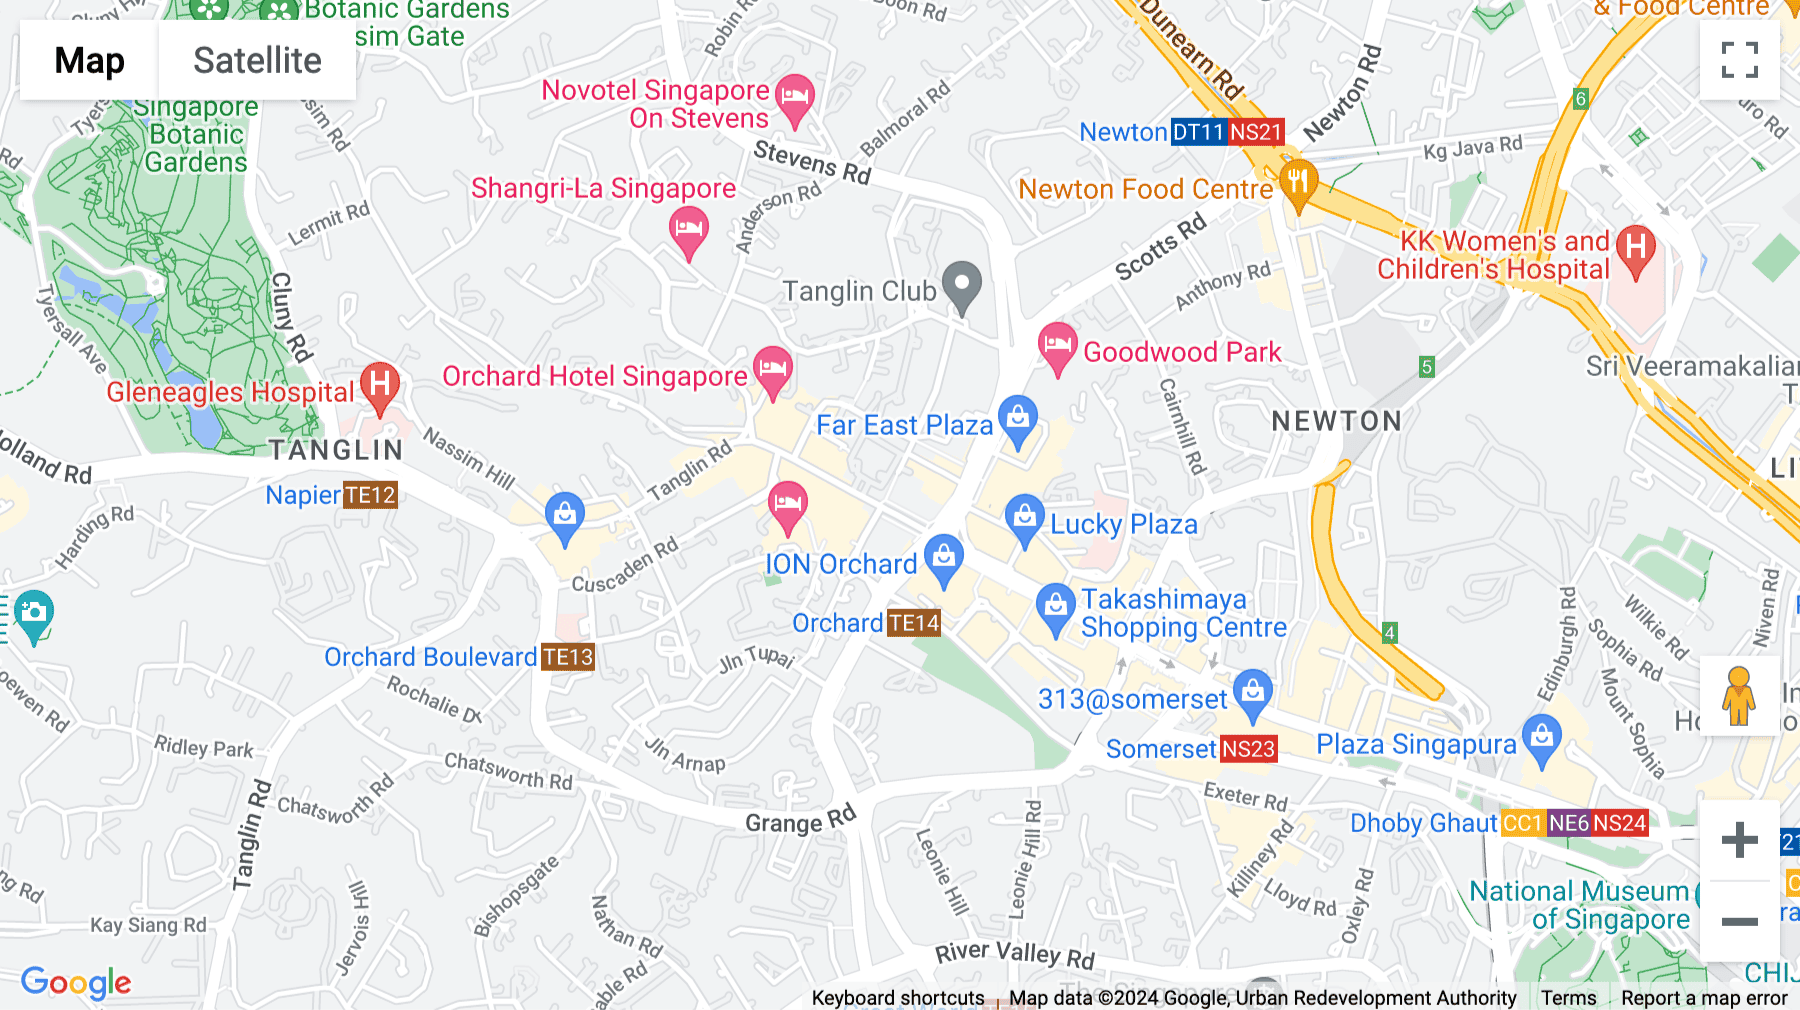 Click for interative map of 350 Orchard Road, Shaw House, Singapore